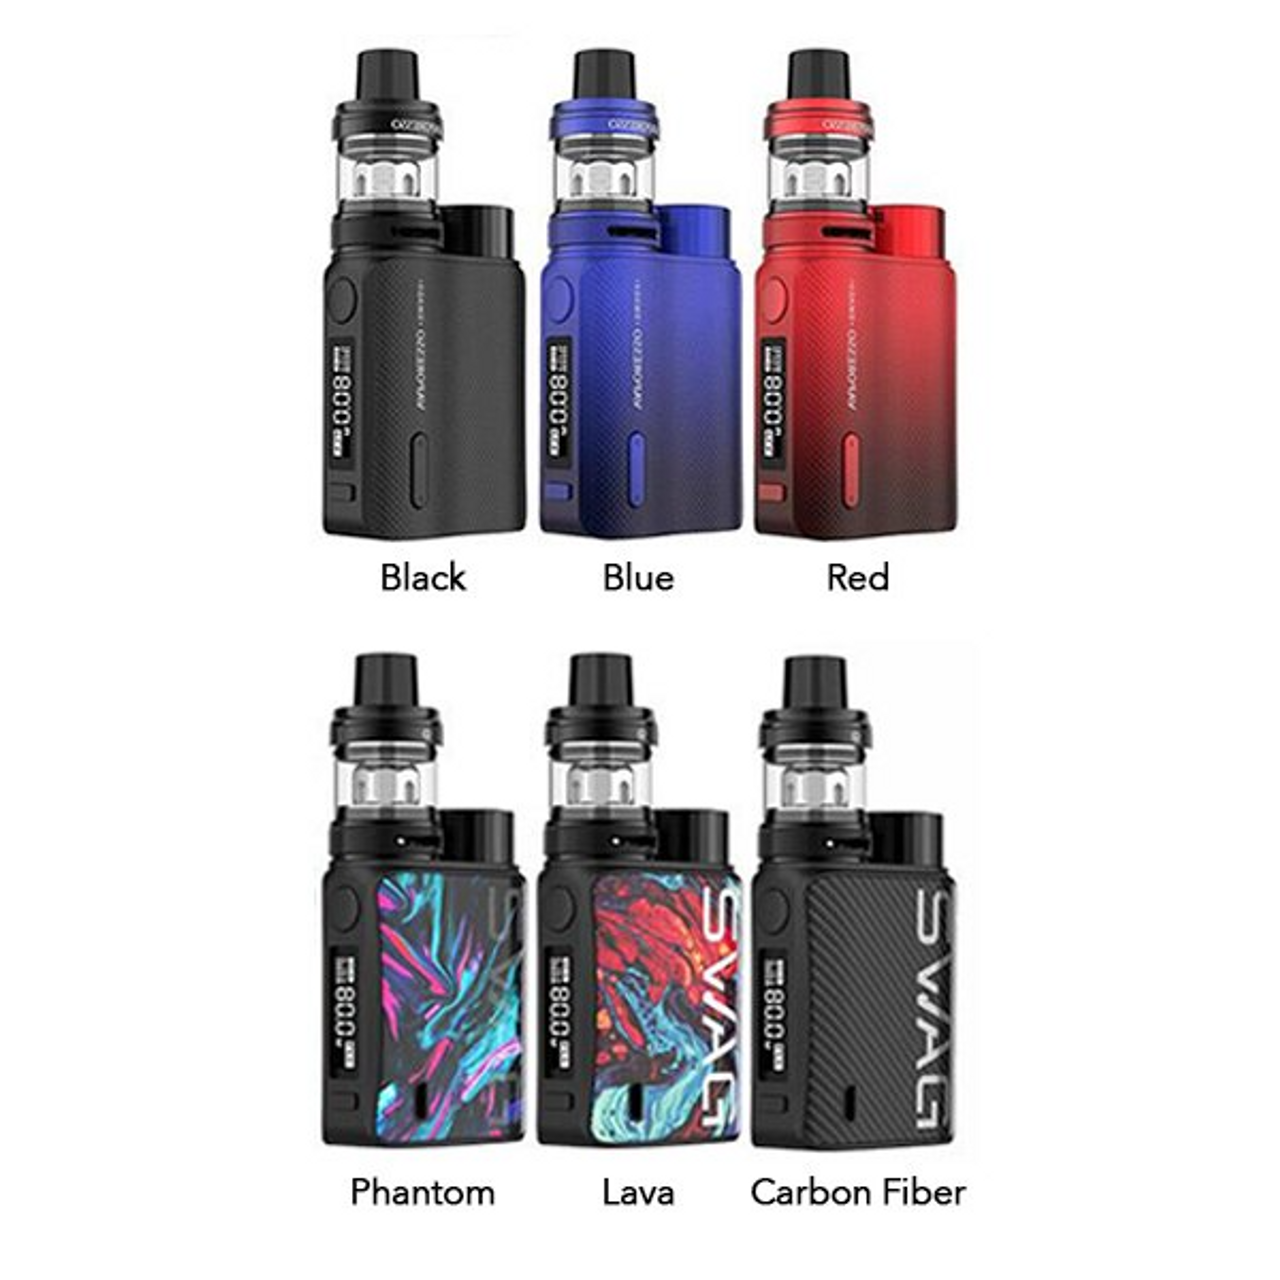 https://cdn11.bigcommerce.com/s-5zbebjcuob/images/stencil/1280x1280/products/3172/9120/Vaporesso-Swag-2-Kit-80w__09369.1607122620.1280.1280__22663.1697264950.png?c=2